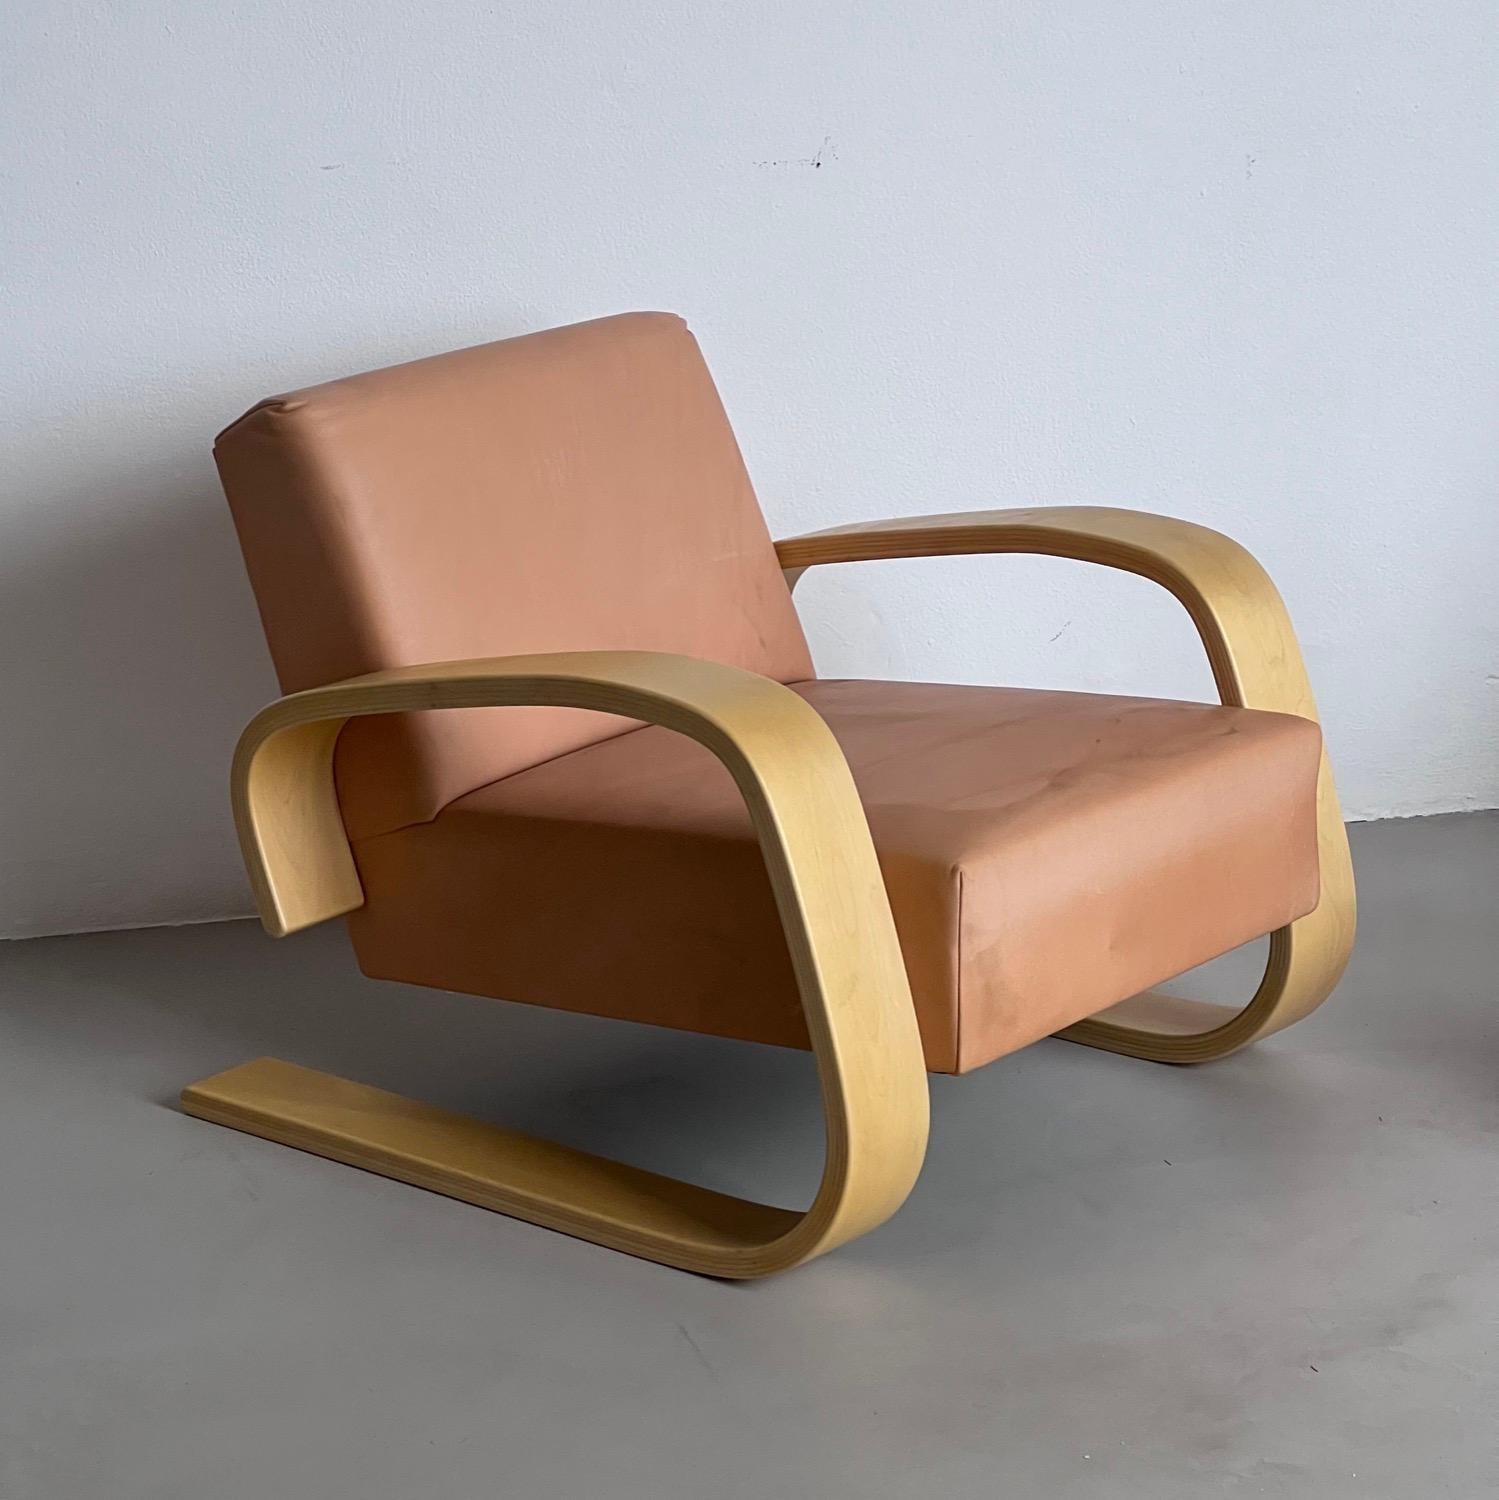 Spinzi is a Milano based creative atelier specialised in furniture design as well as sourcing and trading relevant mid-century collectible design. Check out our storefront and website for a constantly updated selection!

What do this armchair and